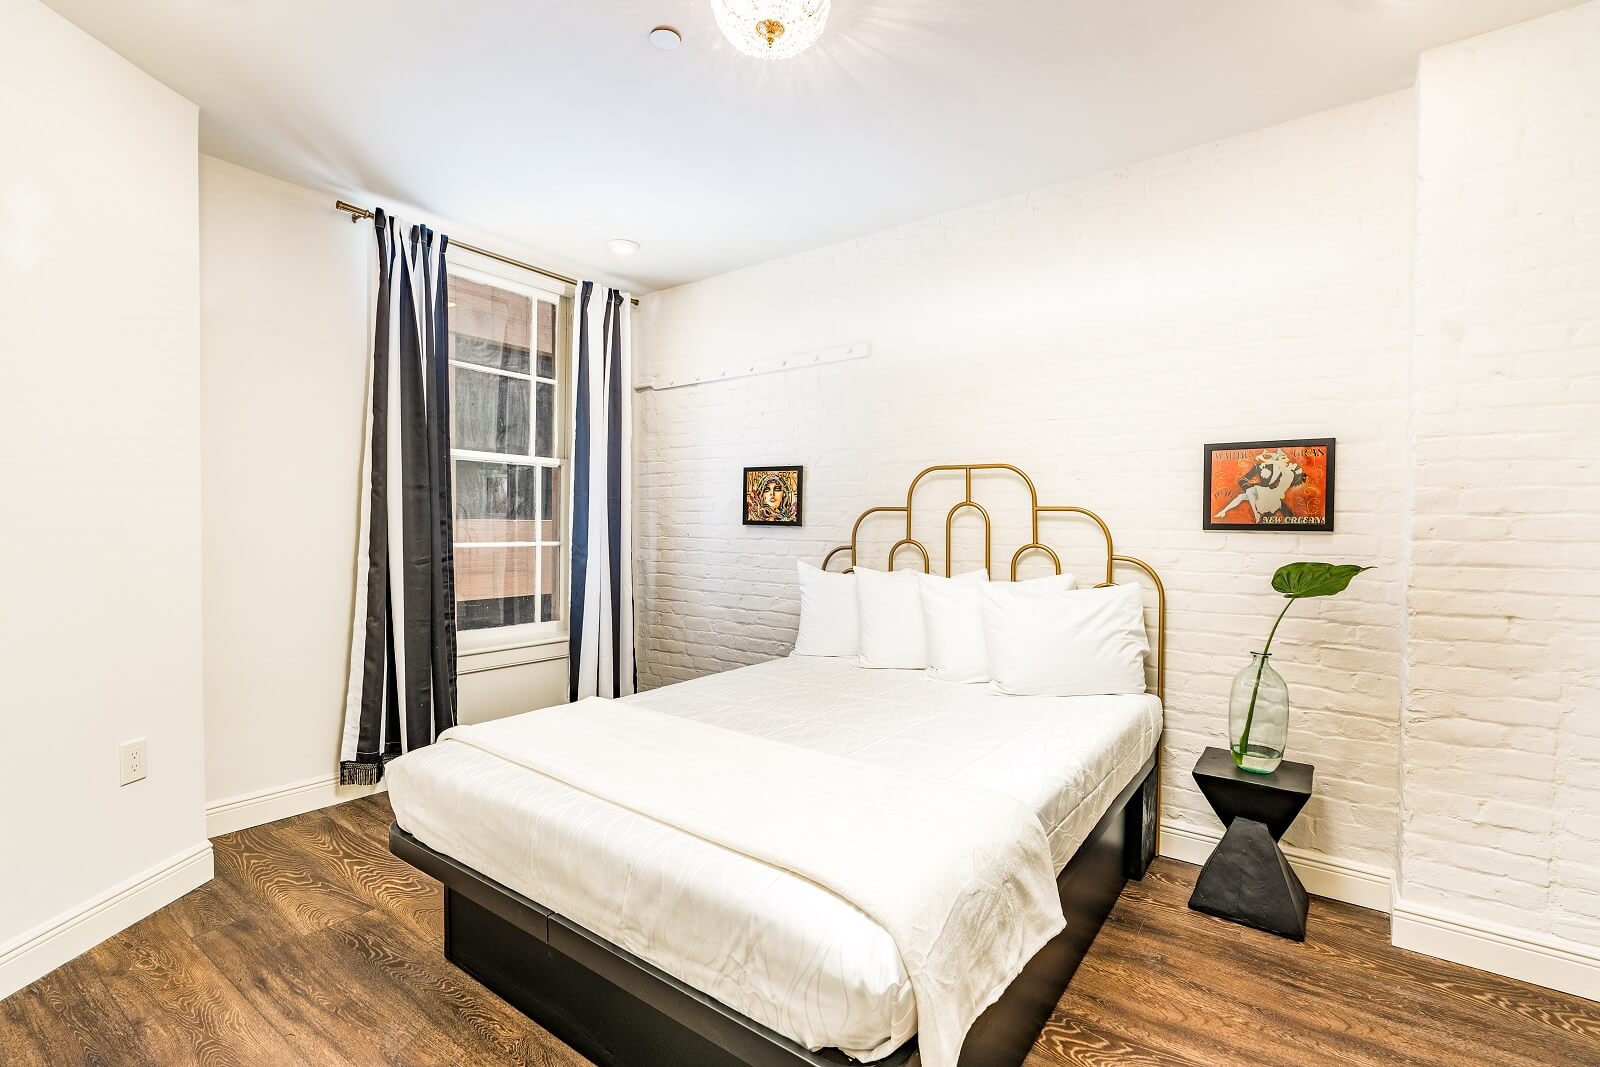 The Alexandre Unit 305 bedroom, a New Orleans luxury rental.